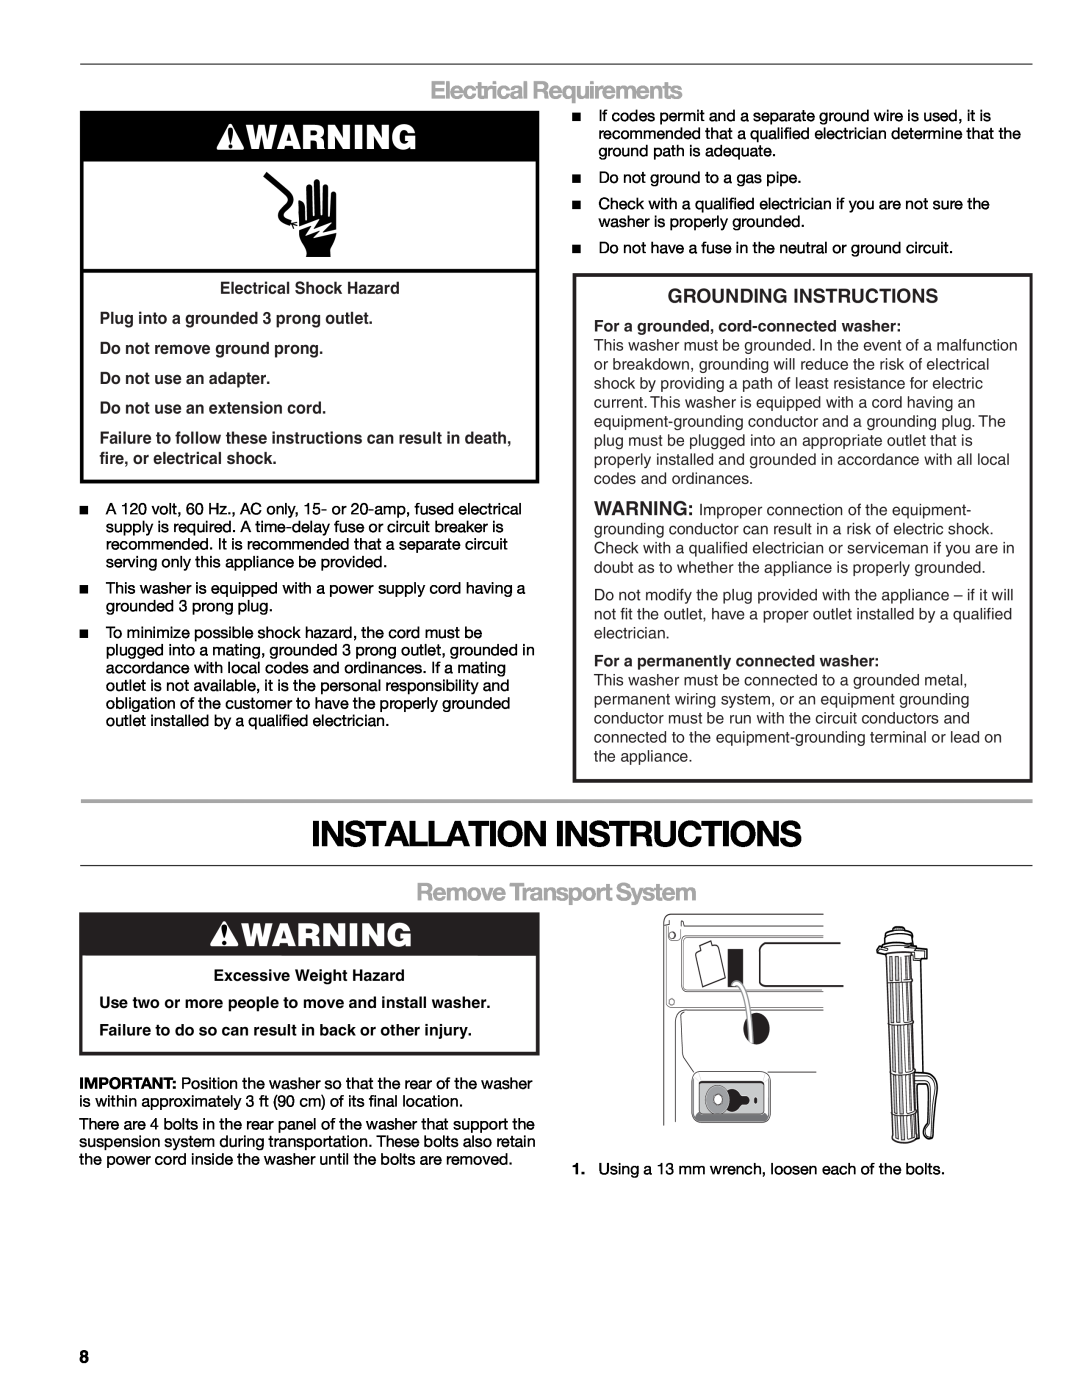 Kenmore W10133487A Installation Instructions, Electrical Requirements, Remove Transport System, Grounding Instructions 